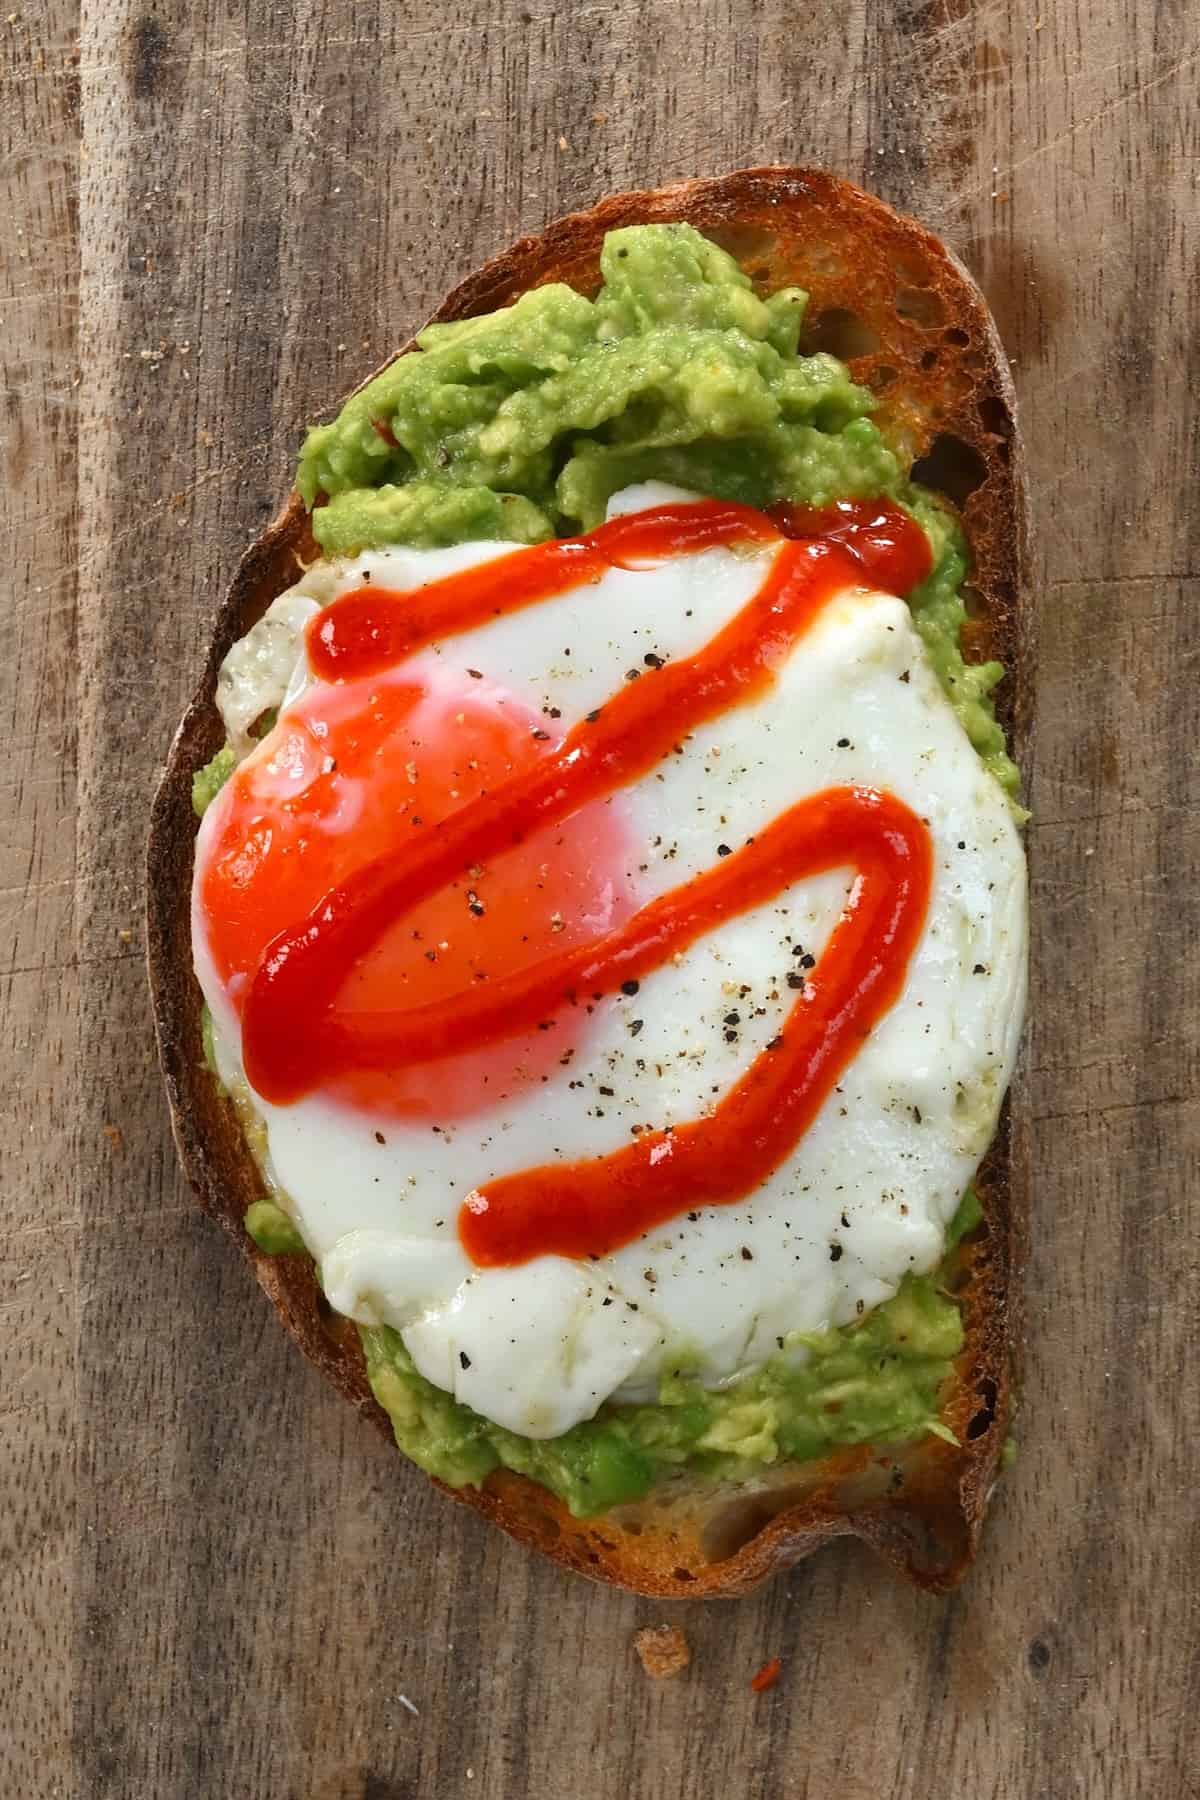 Avocado toast topped with fried egg